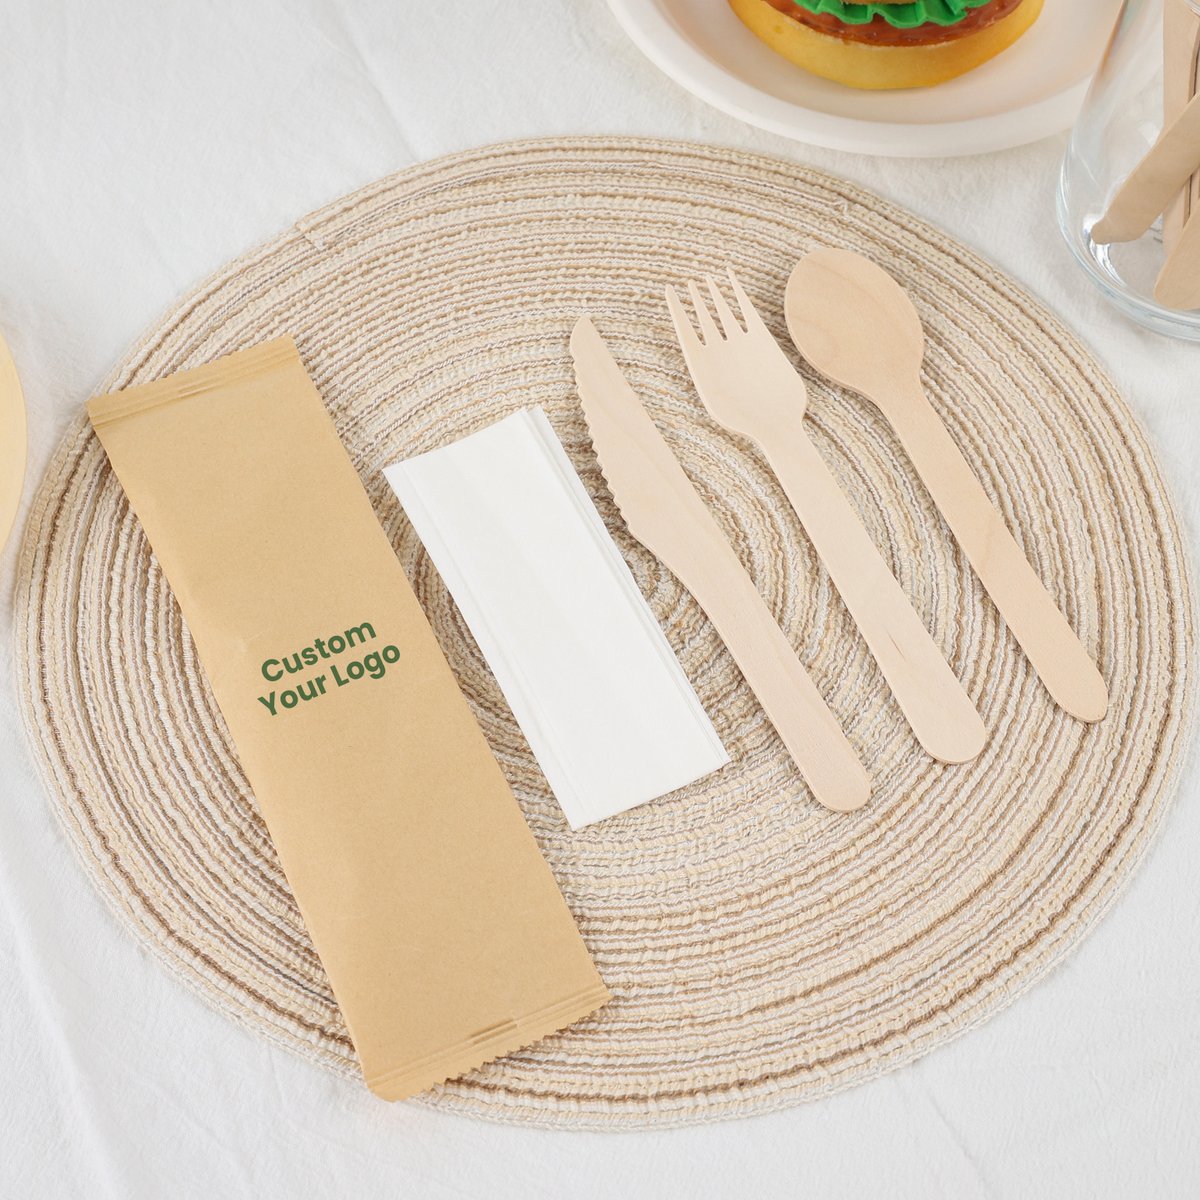 Our bamboo and wood cutlery set is fully customizable so you can put your design and logo on the package. Plus, we'll work with you to make sure the knife, fork, spoon, and napkins meet your exact specifications. 🍴

#sustainable #cutleryset #custom #logo #woodencutlery